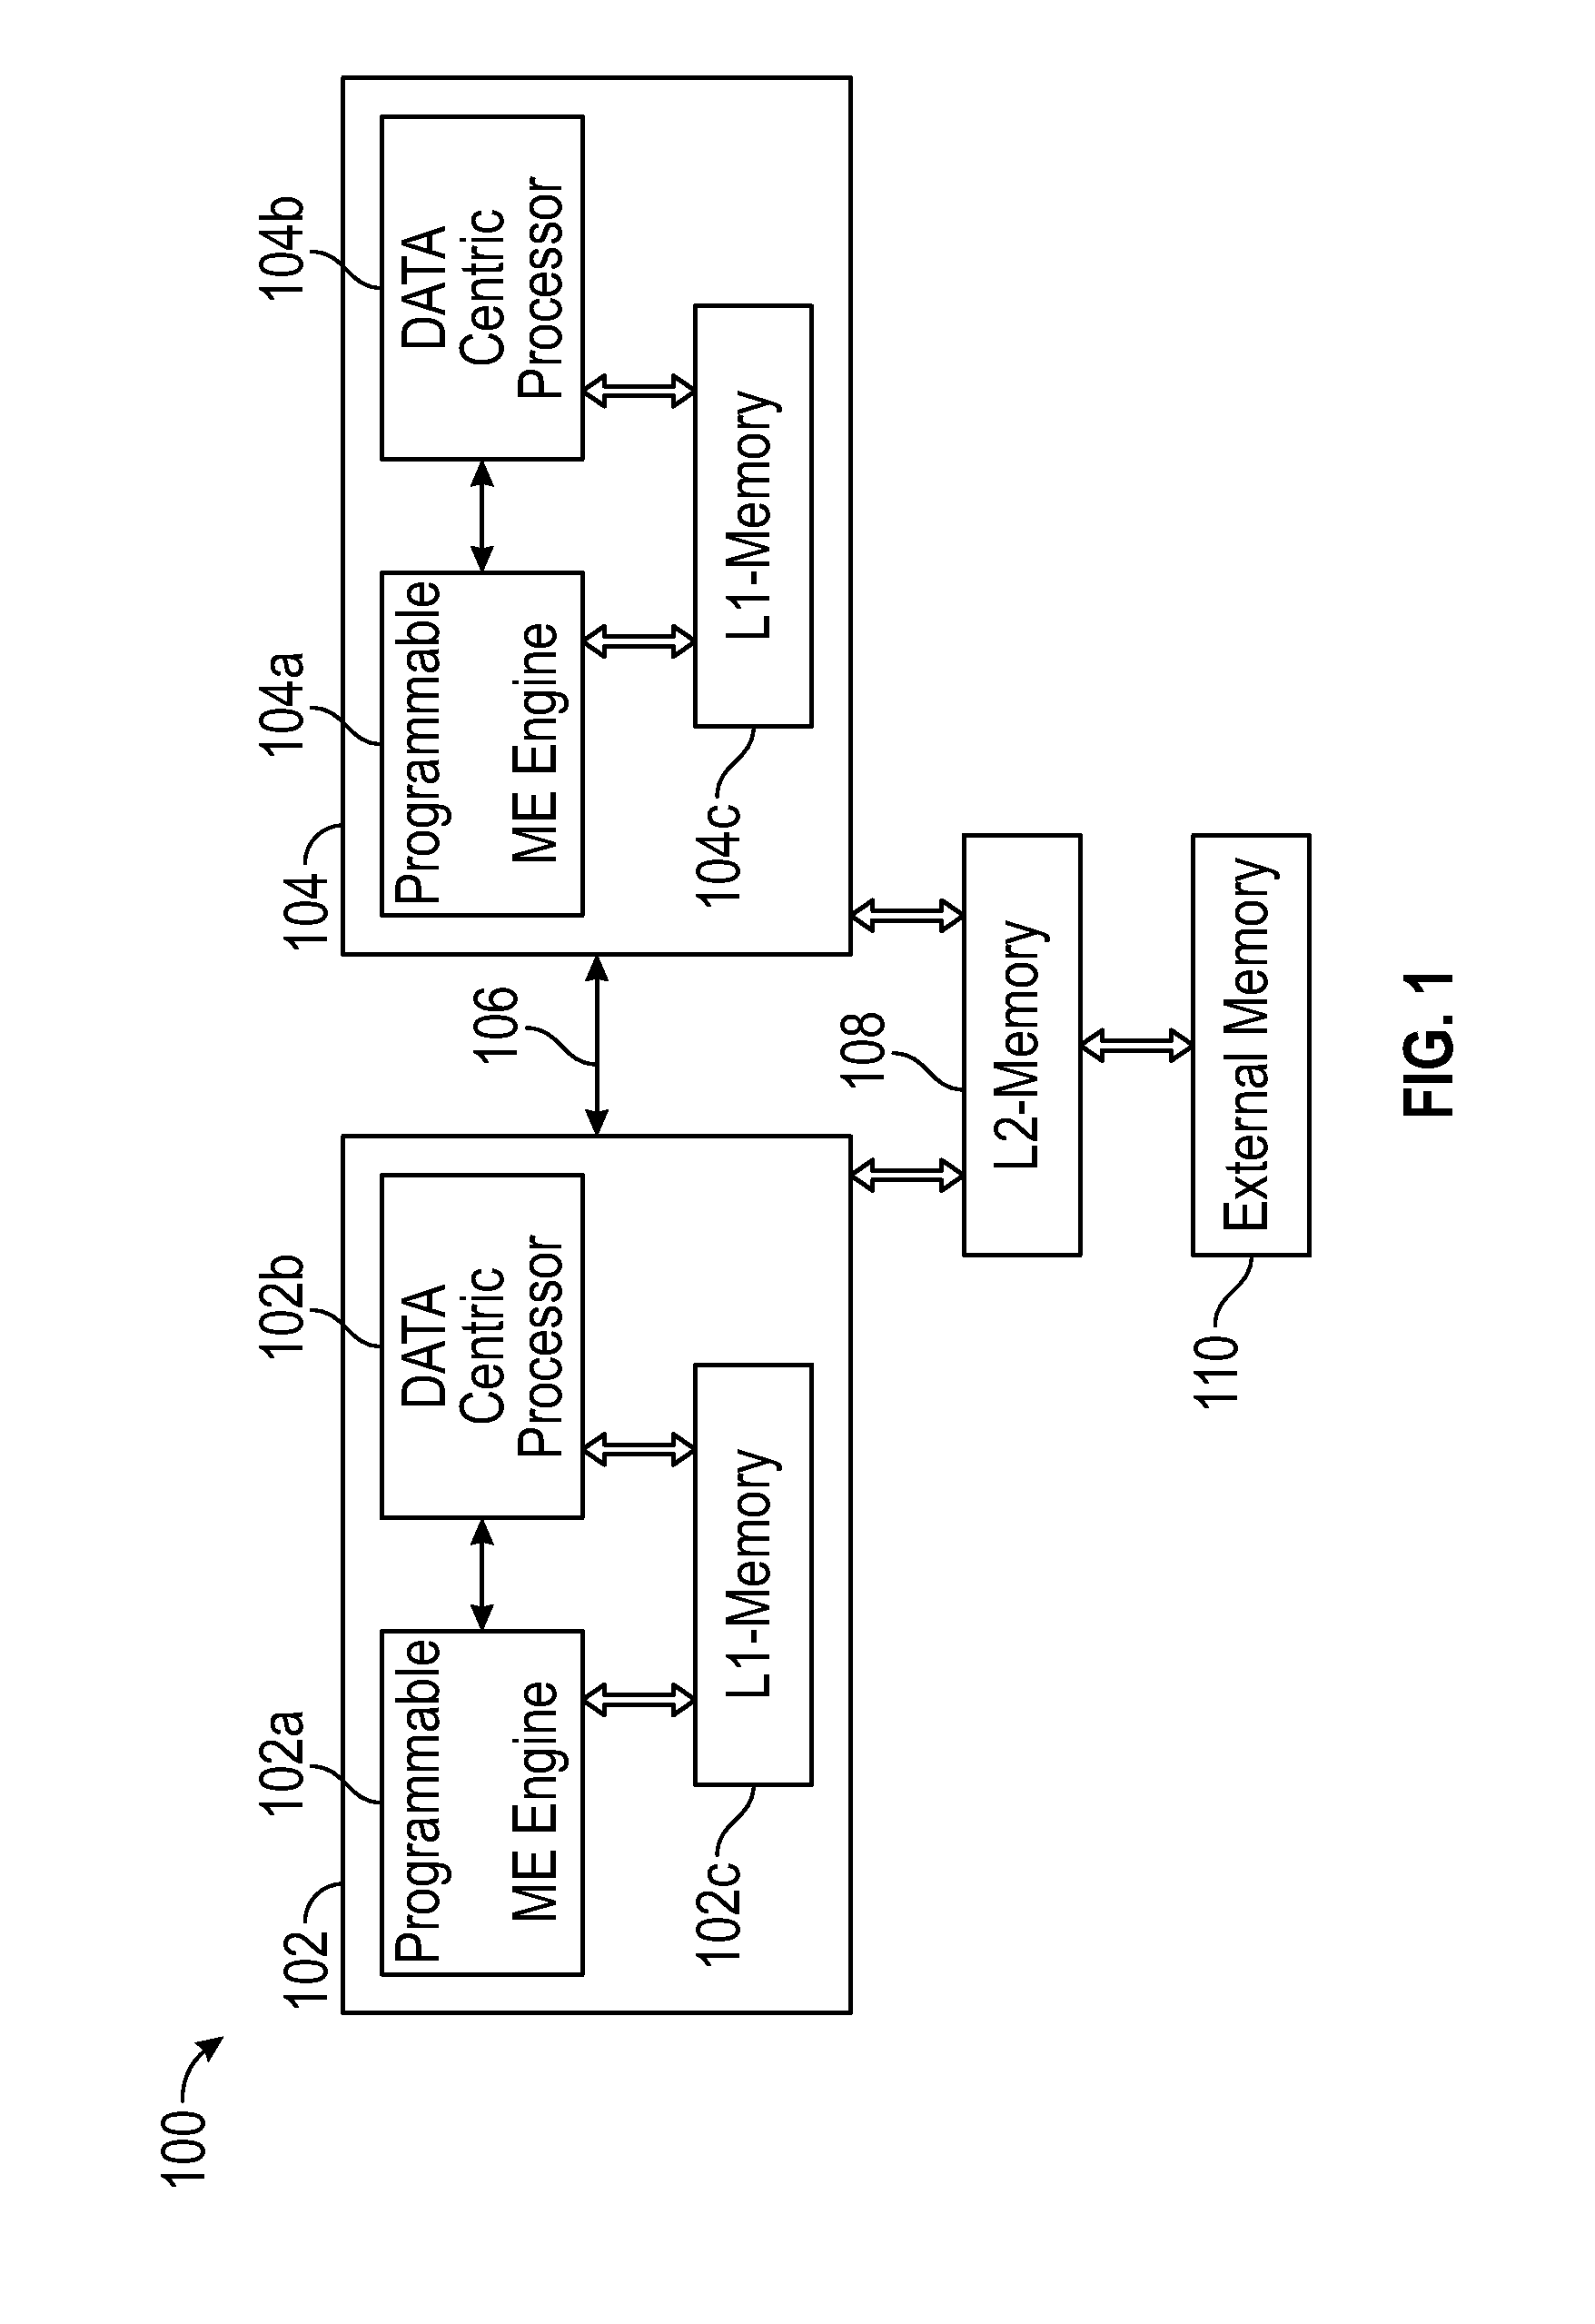 System and method of mapping multiple reference frame motion estimation on multi-core DSP architecture